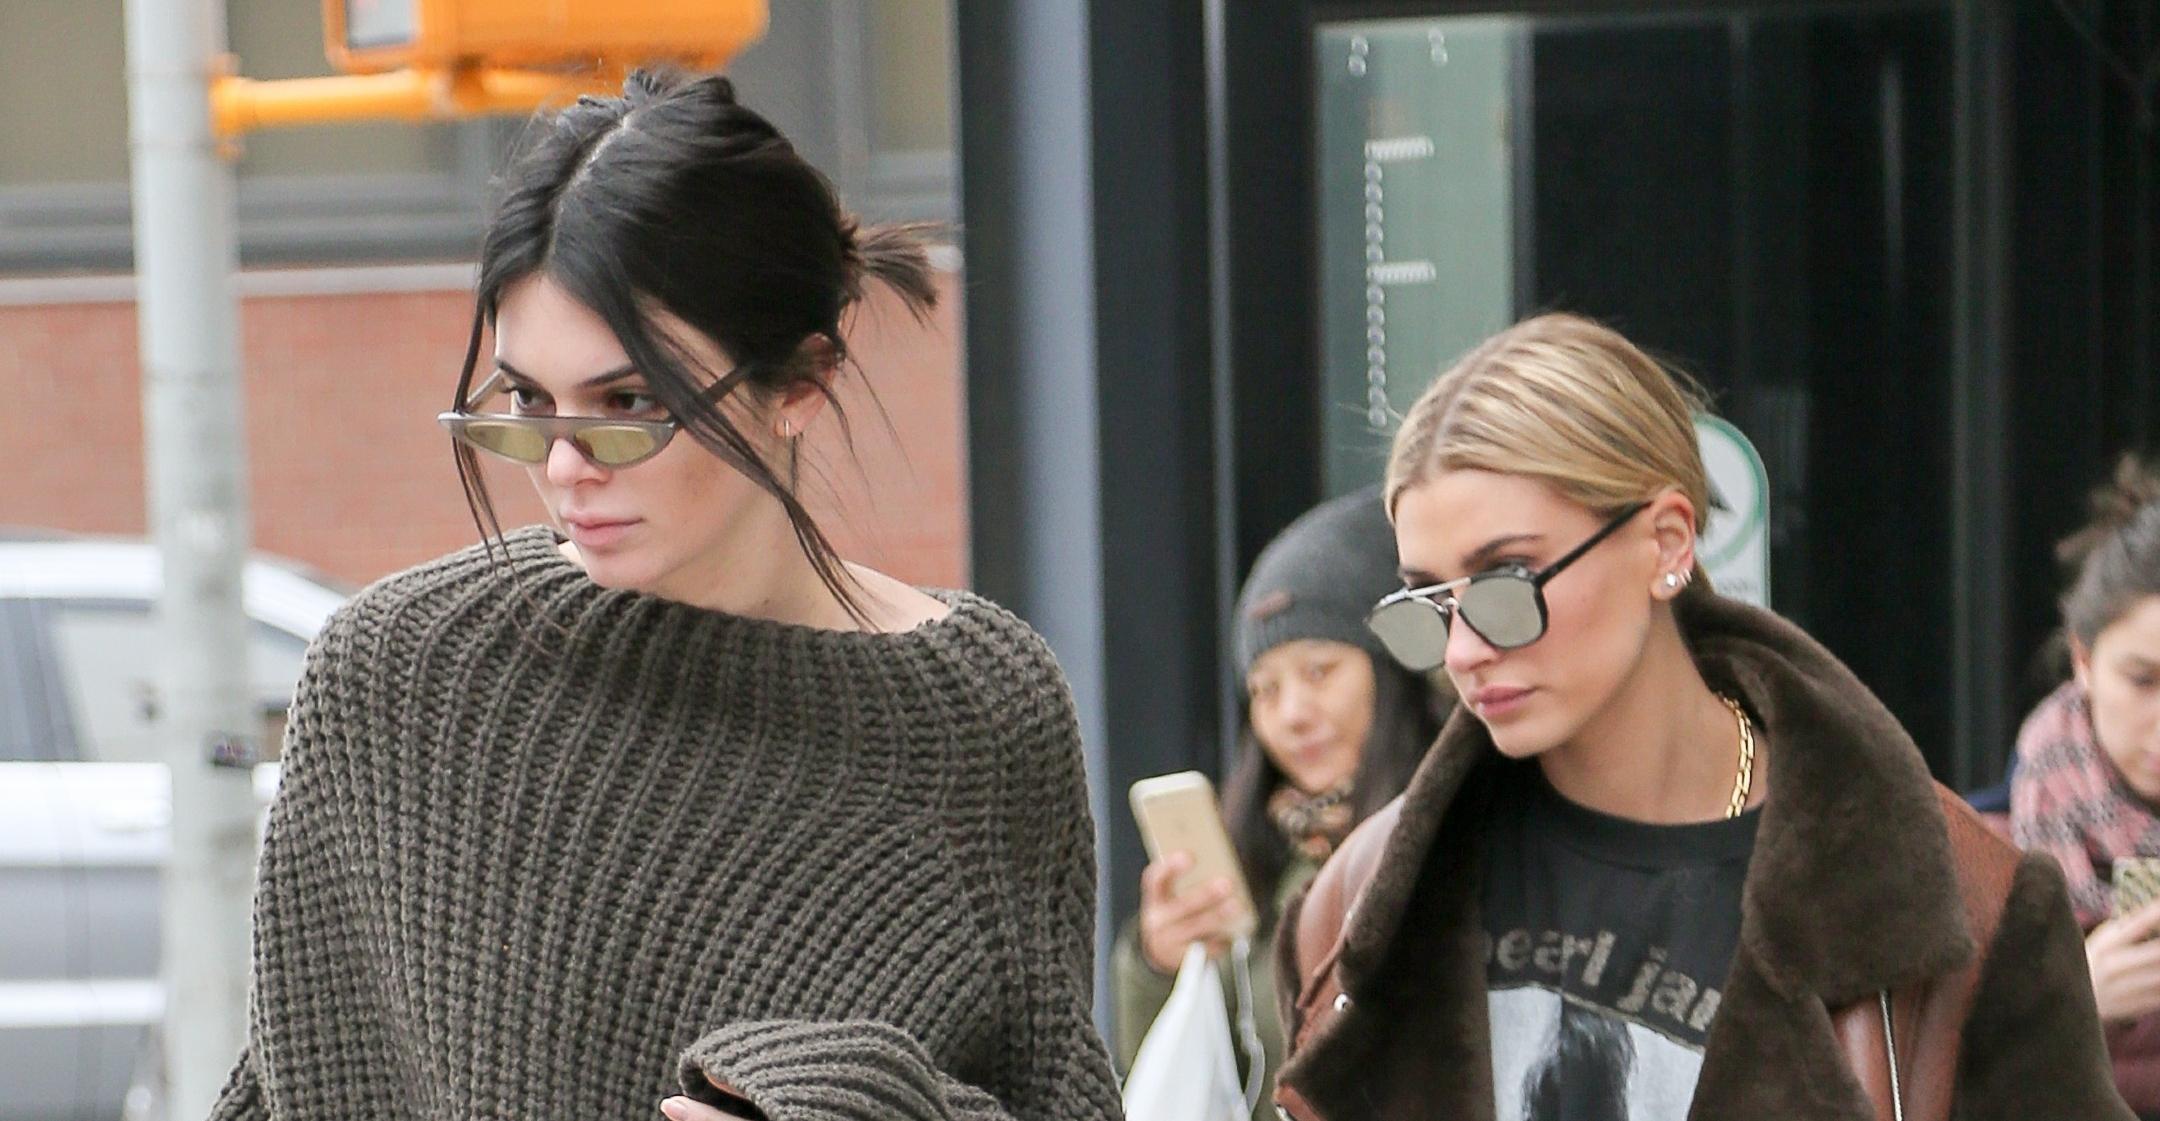 Kendall Jenner, Hailey Baldwin Go To Hot Pilates Together: See Photo!